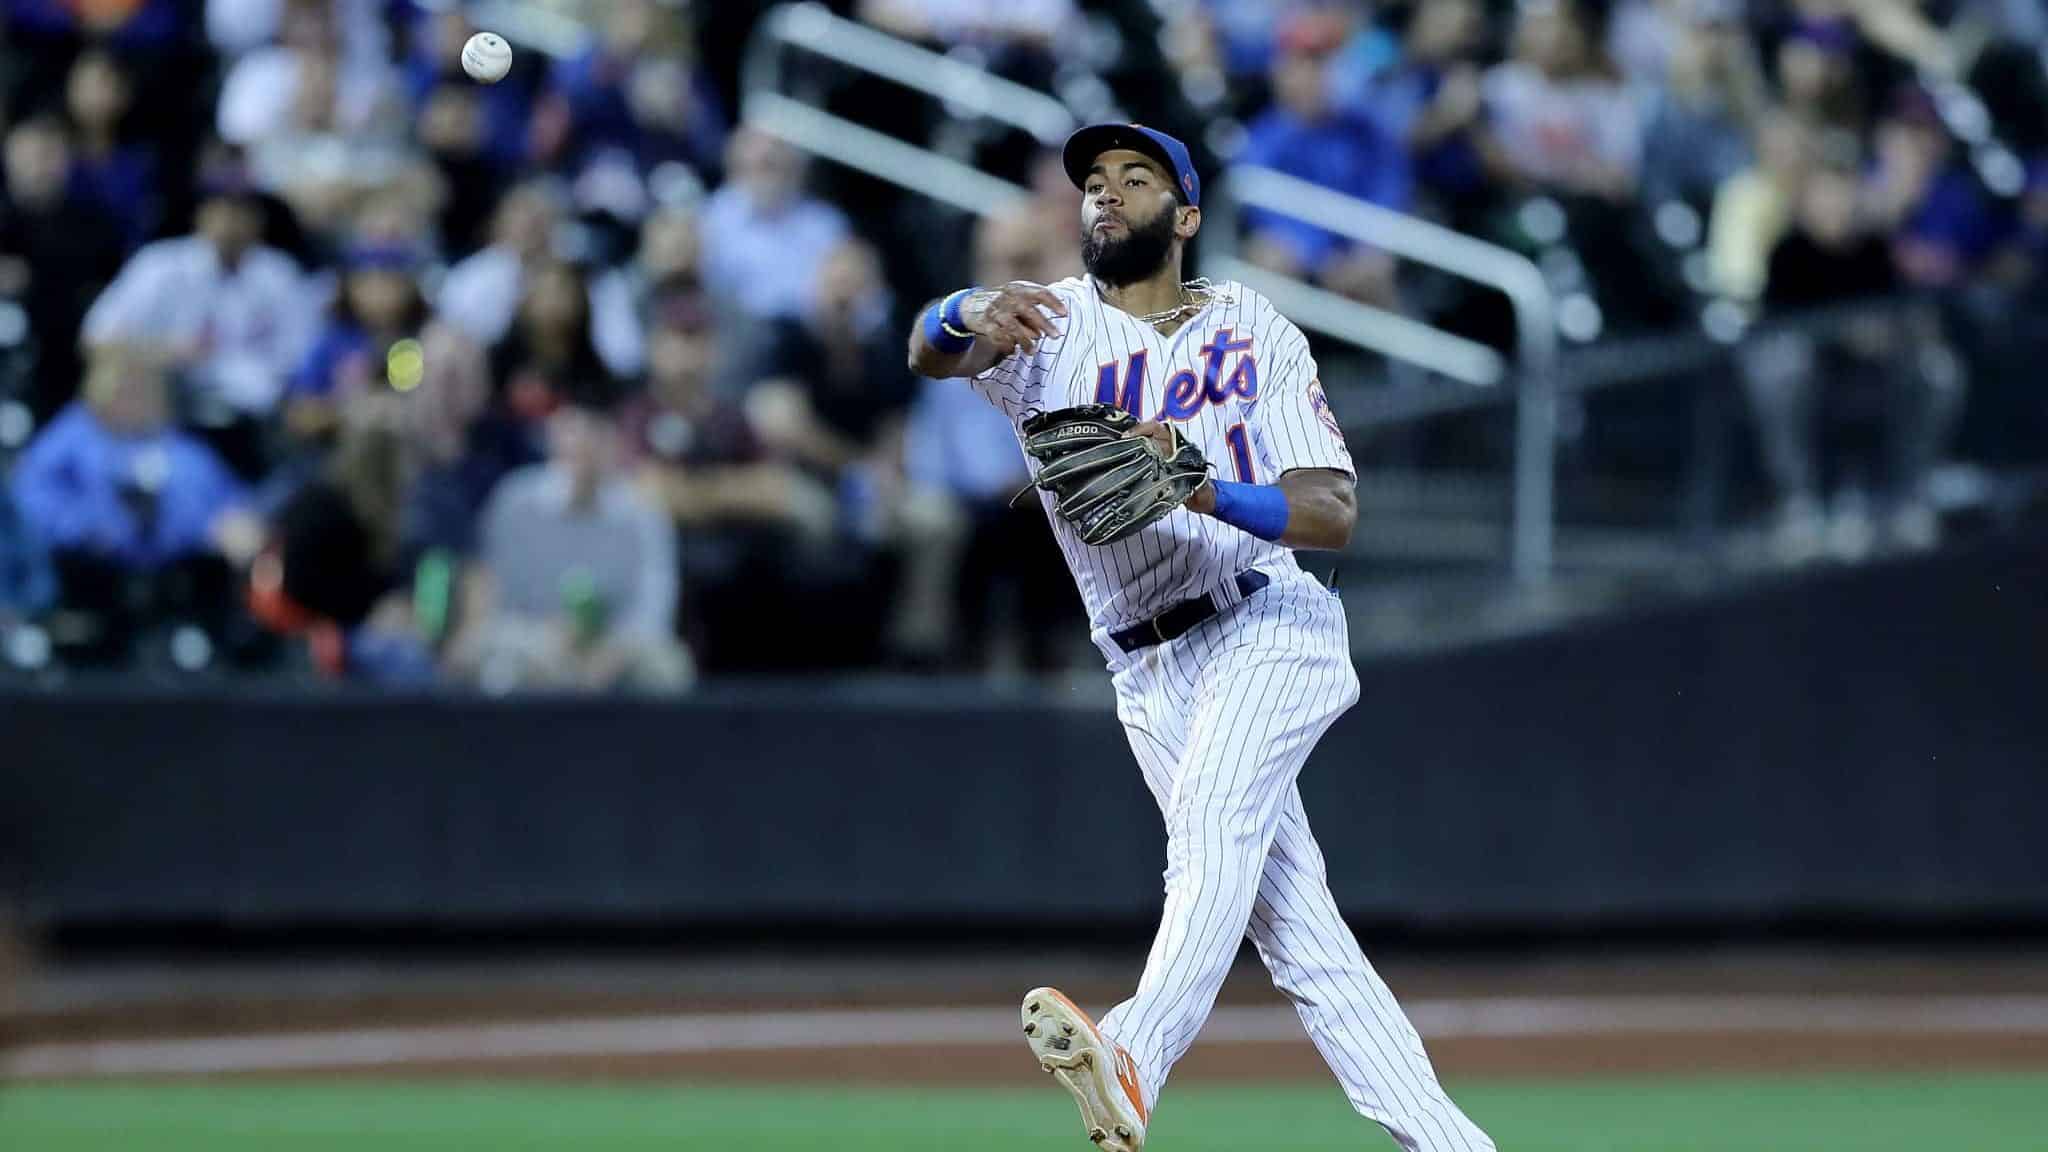 NEW YORK, NEW YORK - SEPTEMBER 24: Amed Rosario #1 of the New York Mets sends the ball to first for the out on a hit by Miguel Rojas of hte Miami Marlins in the fourth inning at Citi Field on September 24, 2019 in the Flushing neighborhood of the Queens borough of New York City.